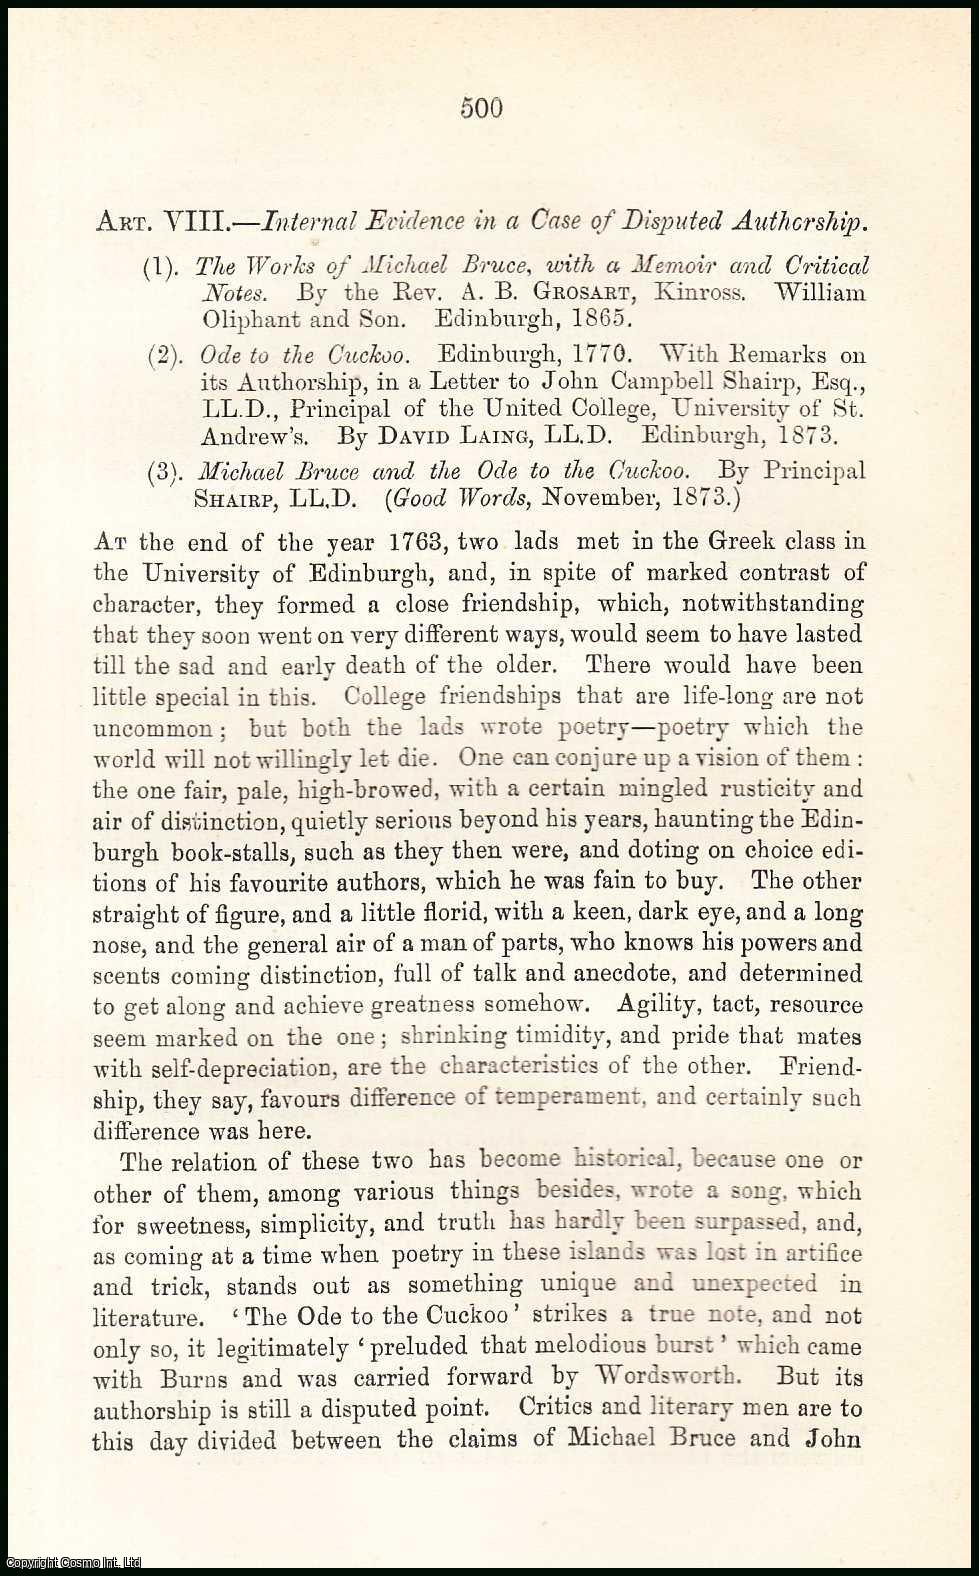 Author Unknown - On a Poem the Ode to the Cuckooby. Michael Bruce or John Logan. Internal Evidence in a Case of Disputed Authorship. A rare original article from the British Quarterly Review, 1875.